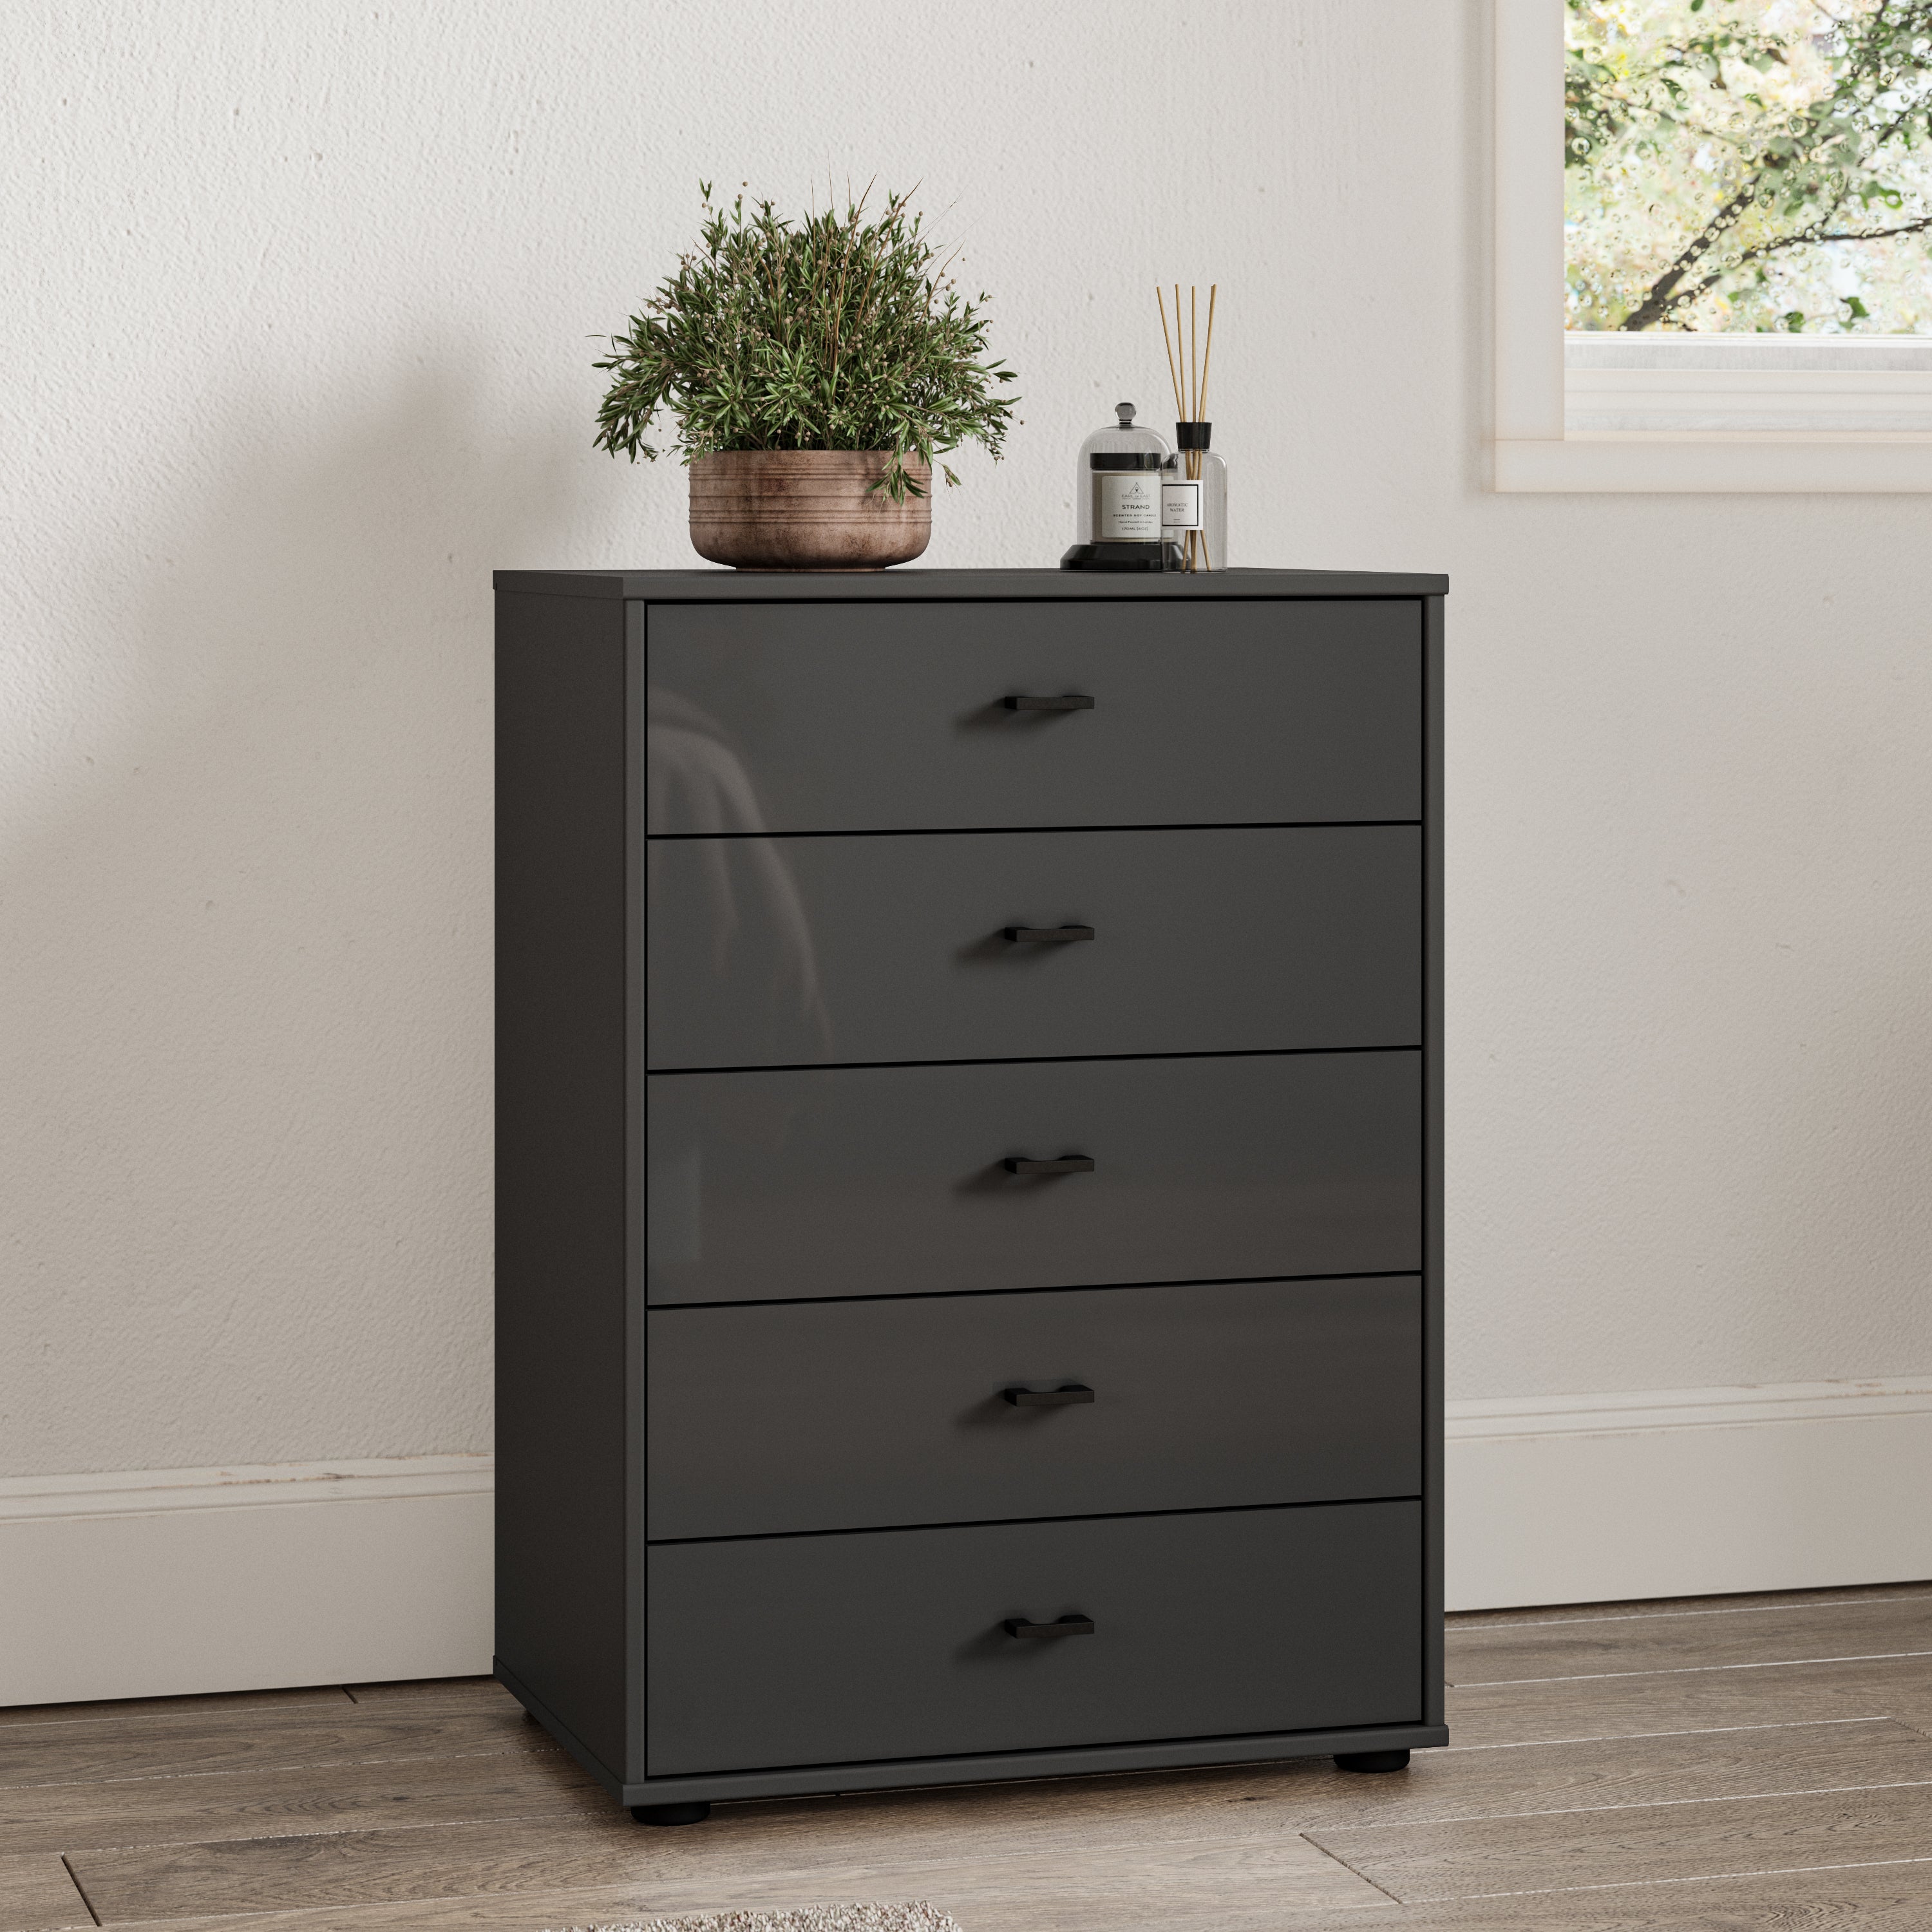 Kahla Glass Fronted Small 5 Drawer Chest Dark Grey